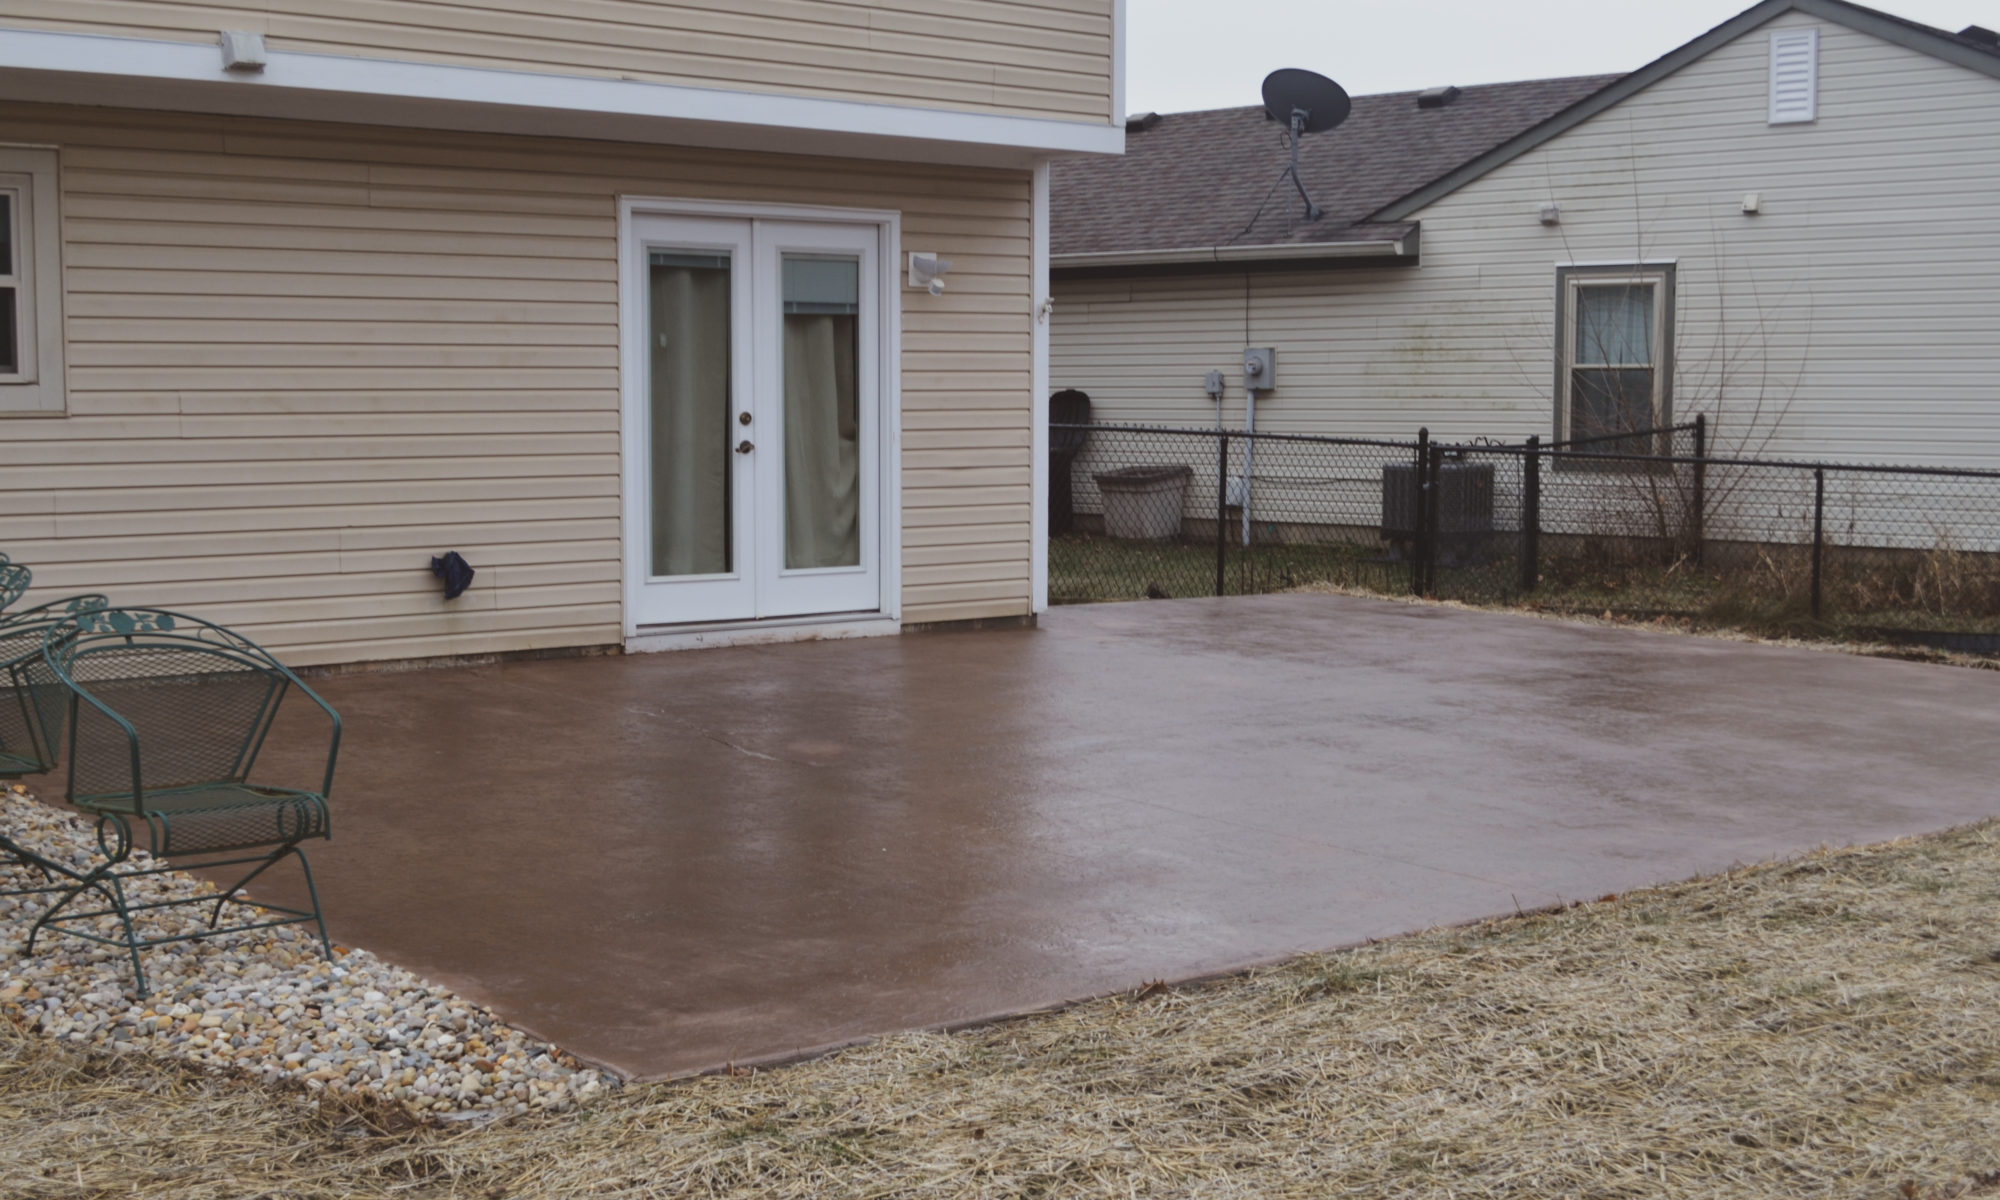 Precision Outdoors Fishers Stamped Concrete Patio Fishers indiana